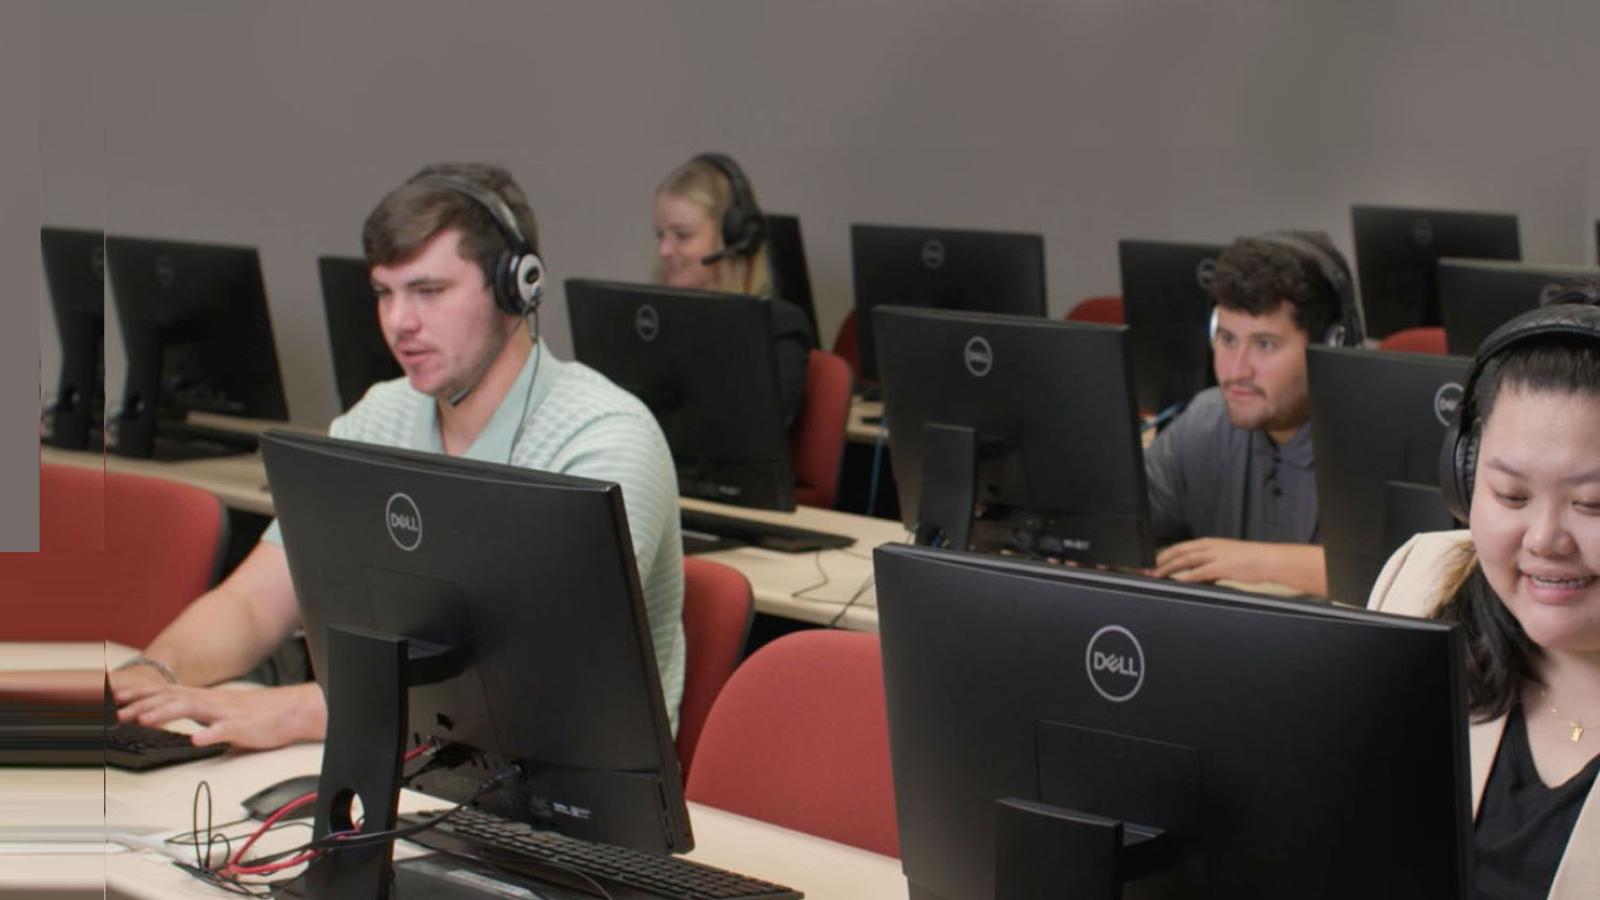 four students working at the Pace Connect call center, wearing headphones and sitting at computers